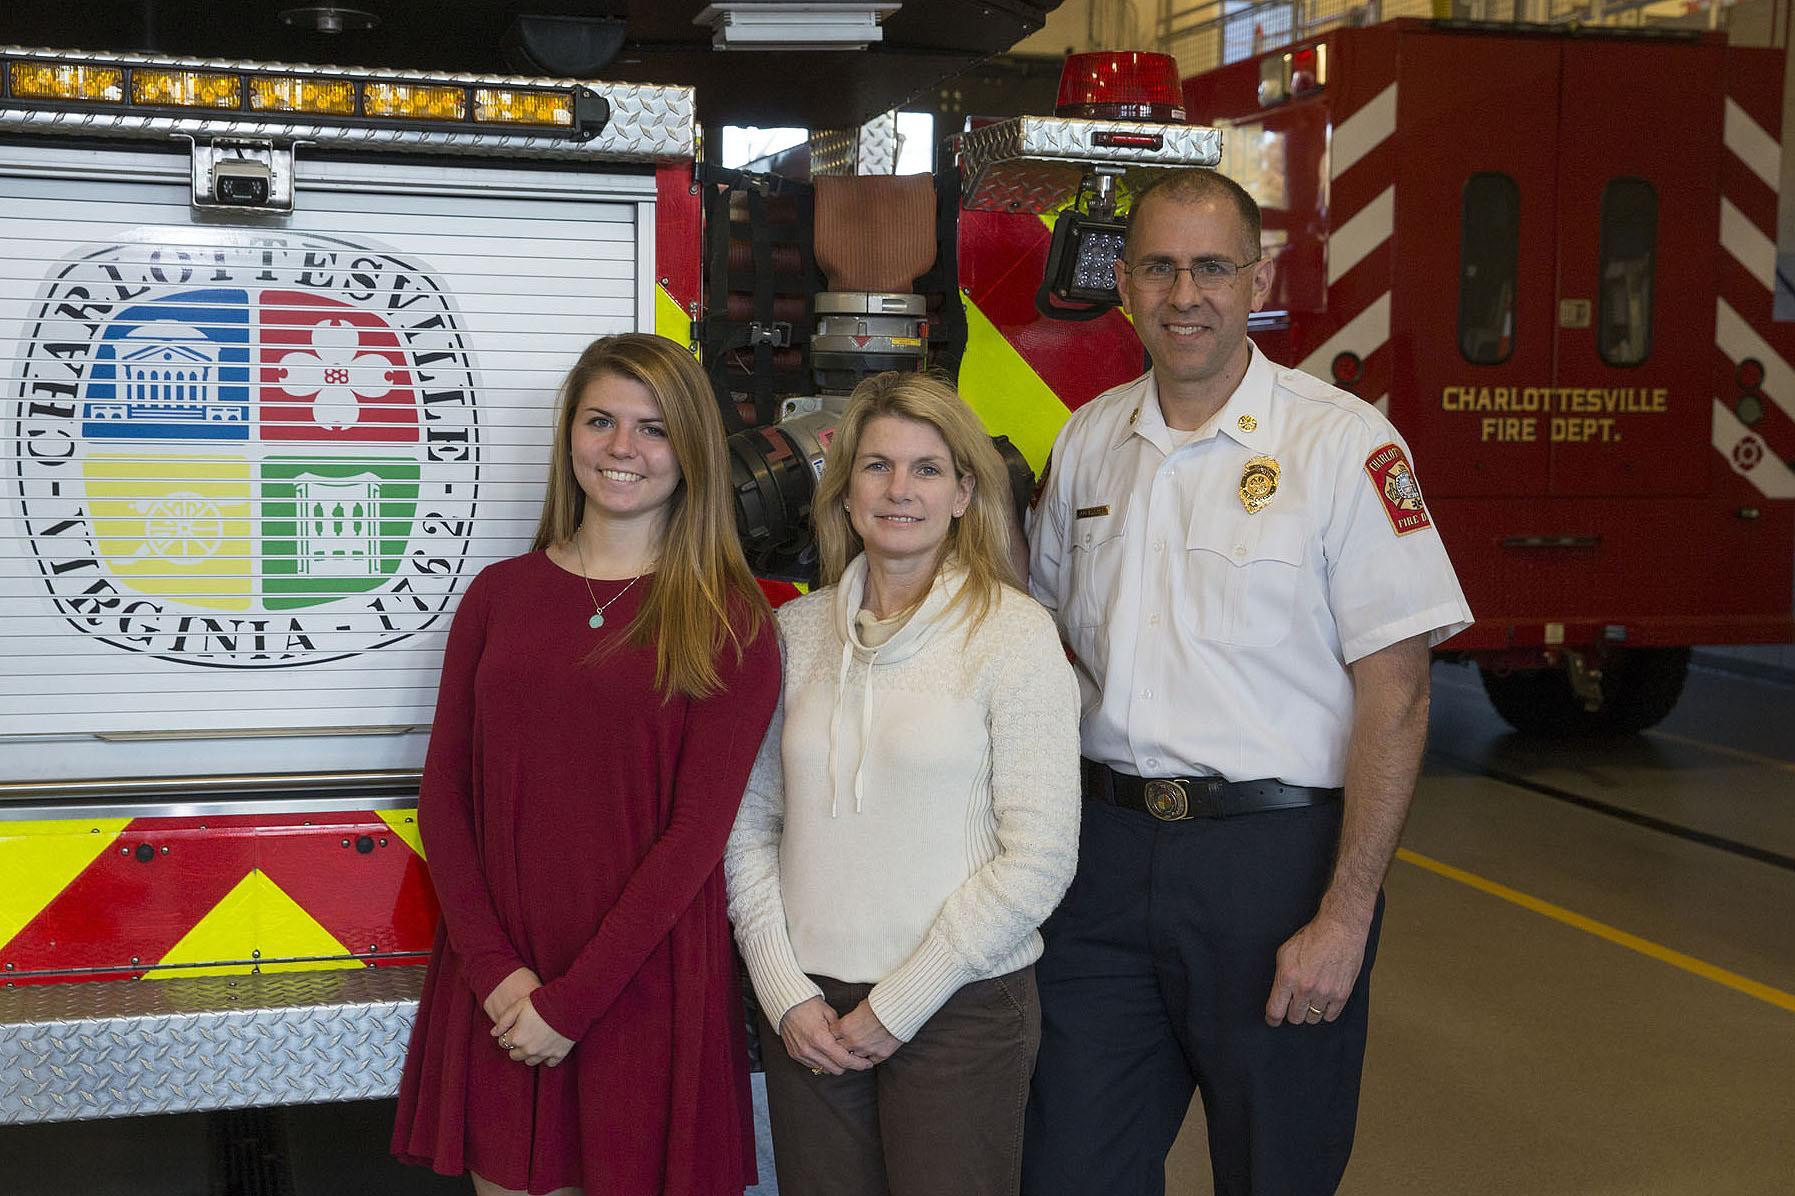 Andrew Baxter, right, stands with his daughter, Kate, left, and wife, Barbara, at a firetruck